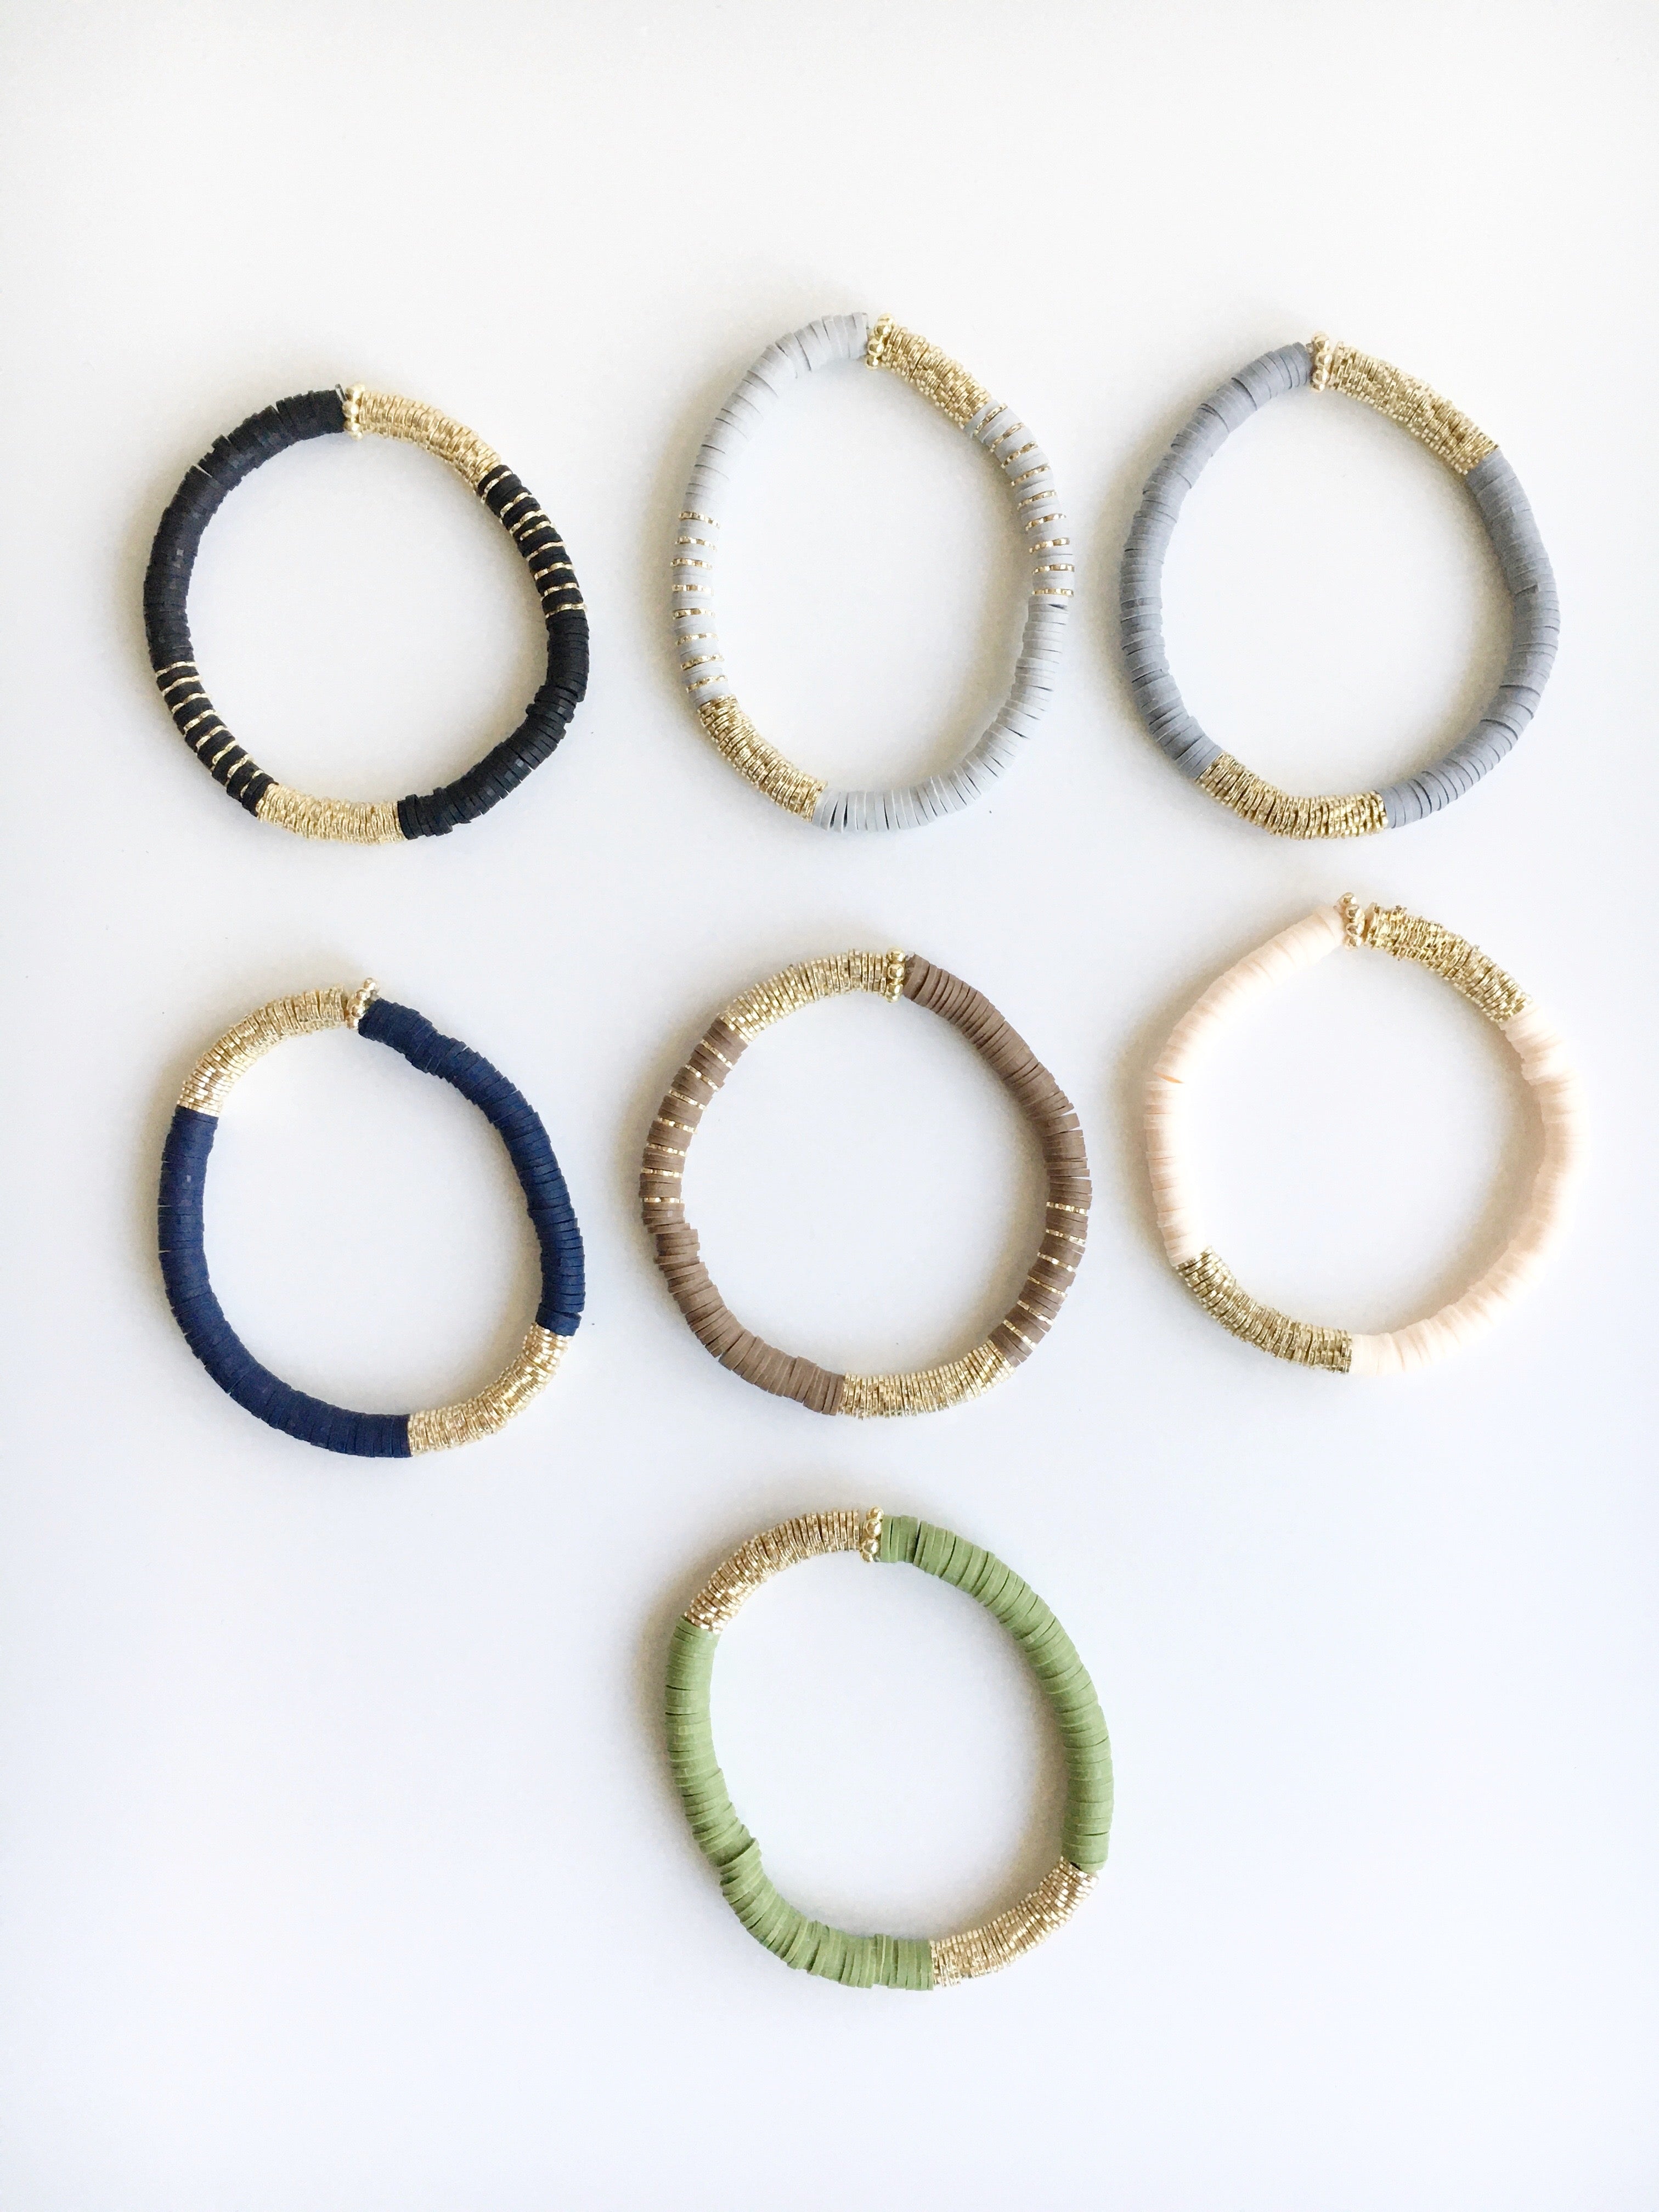 Top view of stretch beaded bracelets in Black, Light gray, dark gray, navy blue, brown, vanilla, and olive with no labels.